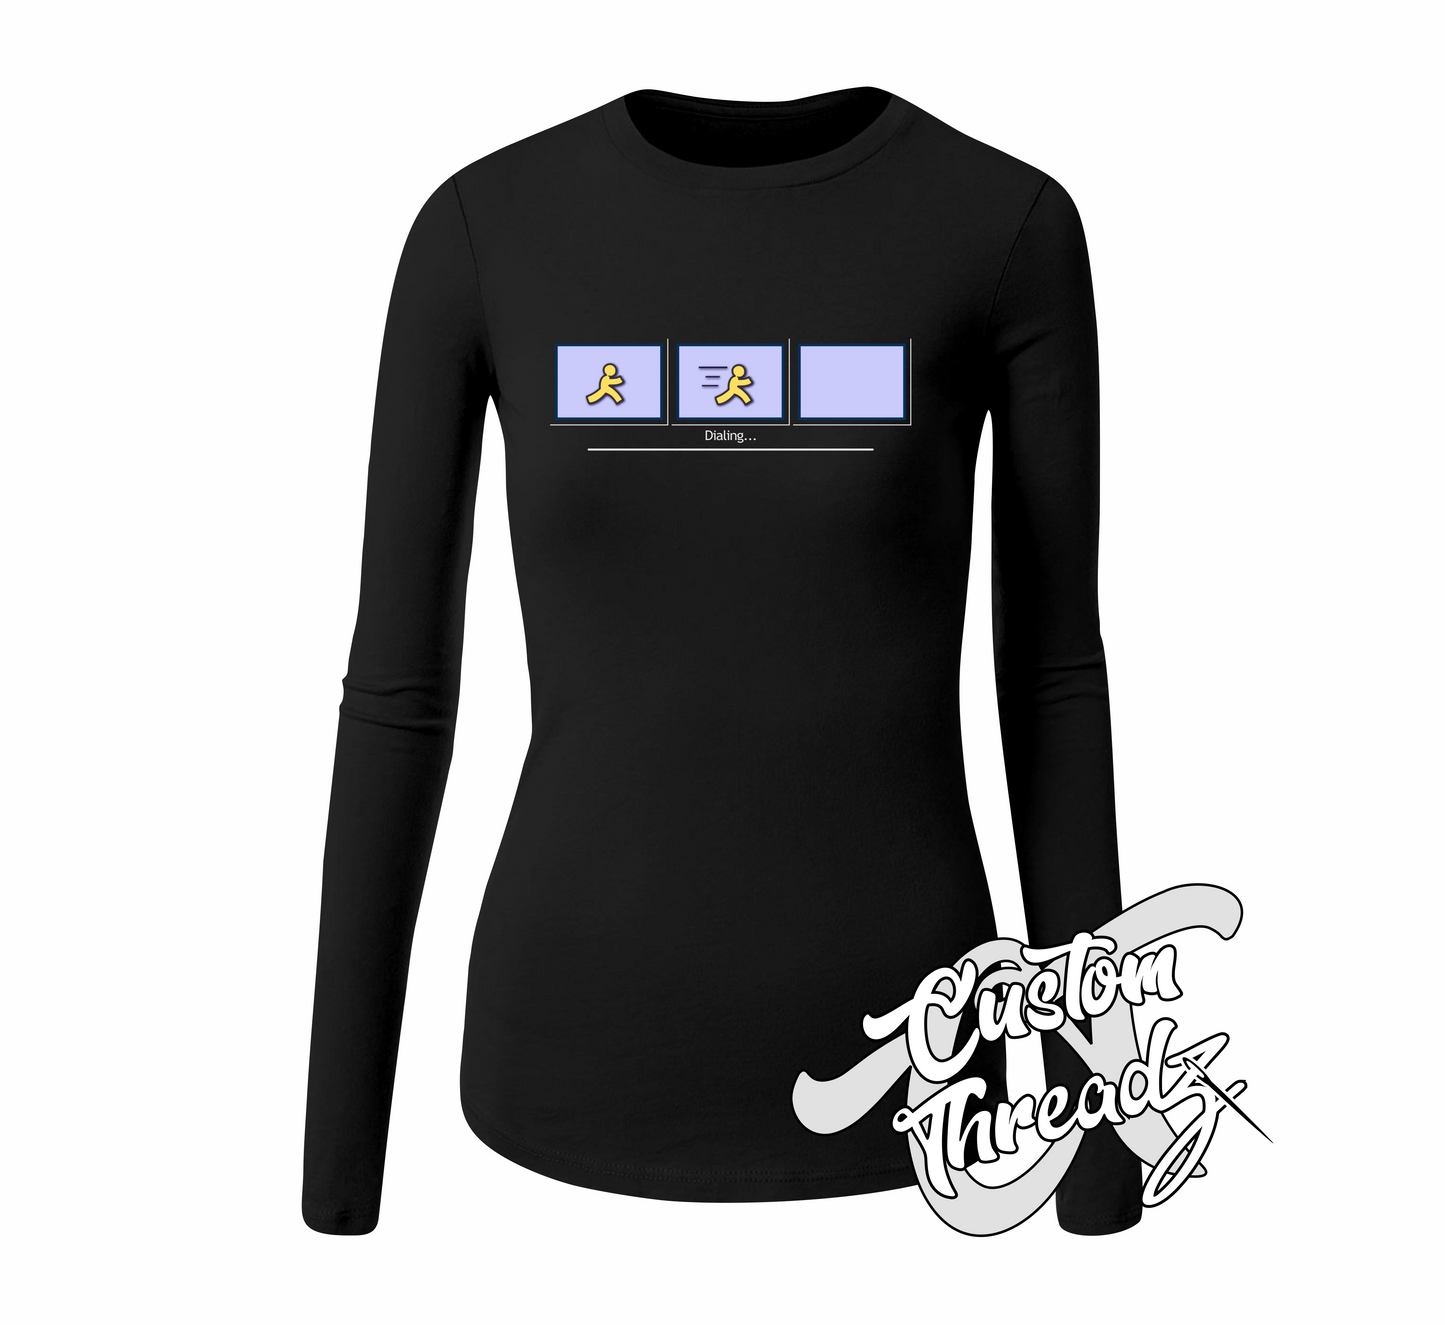 black womens long sleeve tee with AOL dial up DTG printed design